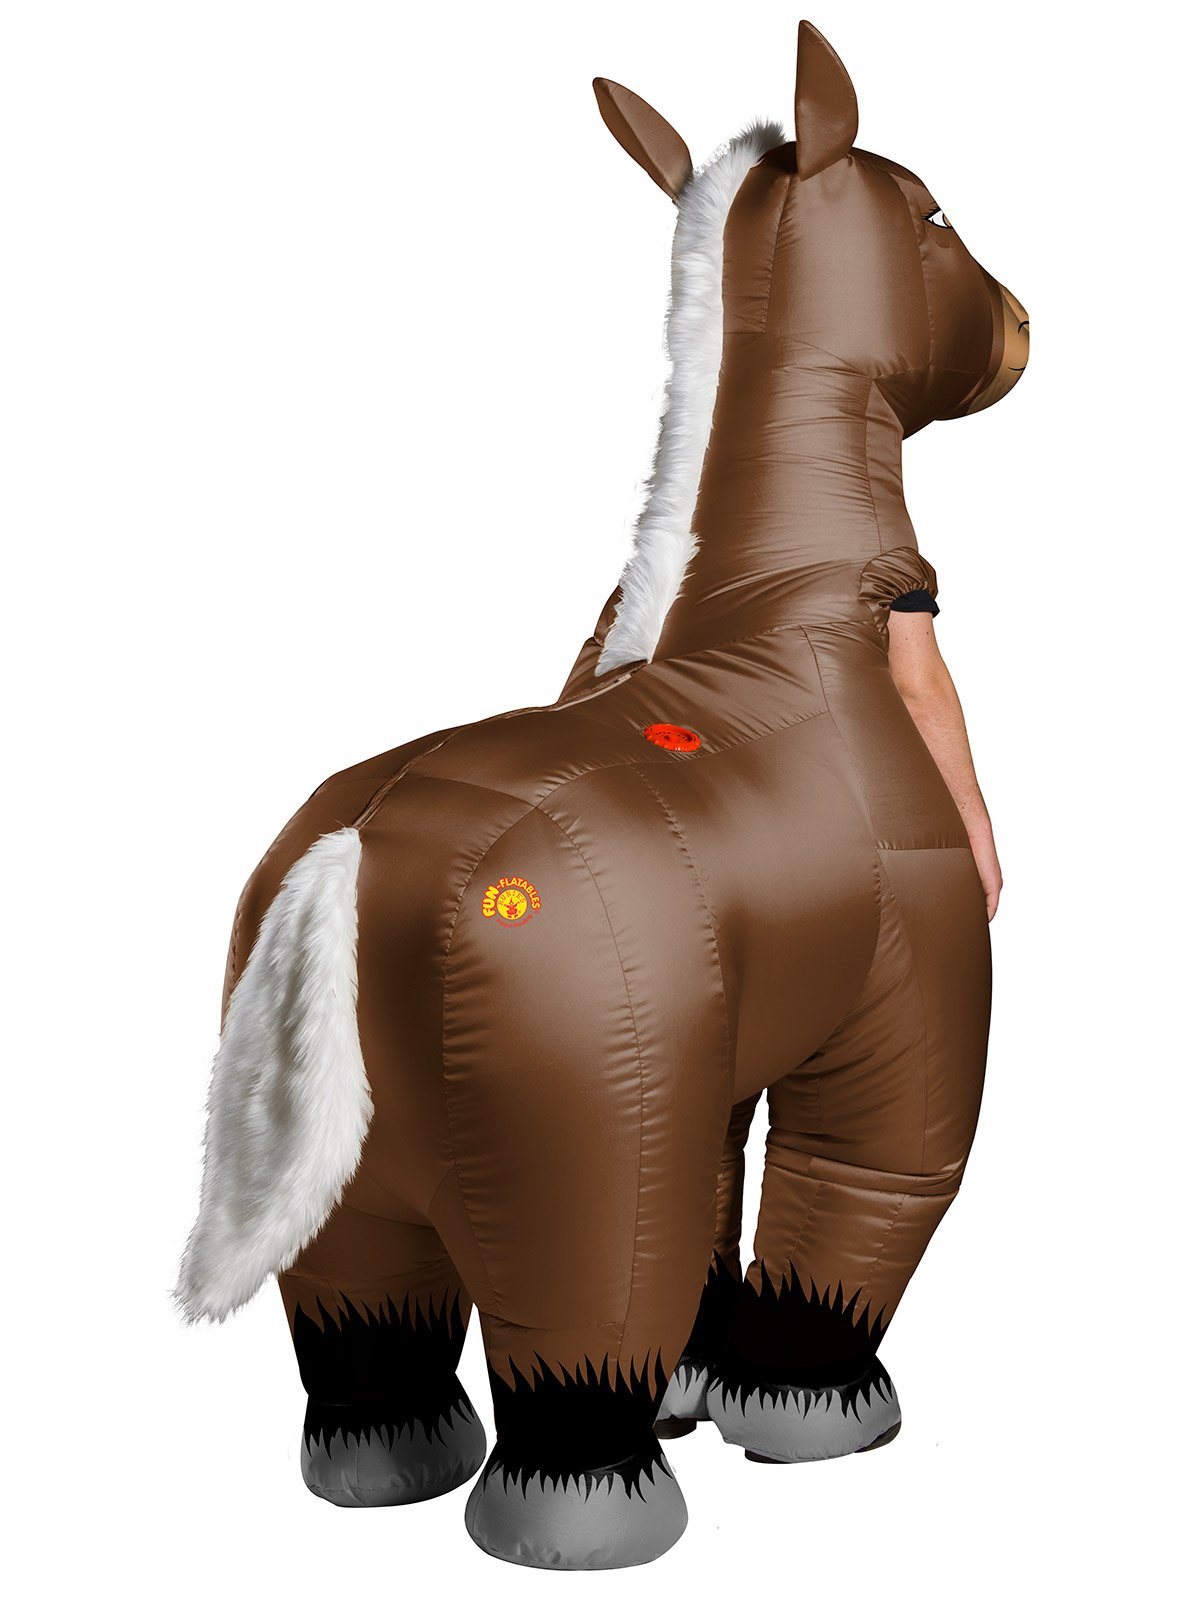 Costume Adult Inflatable Mr Horsey